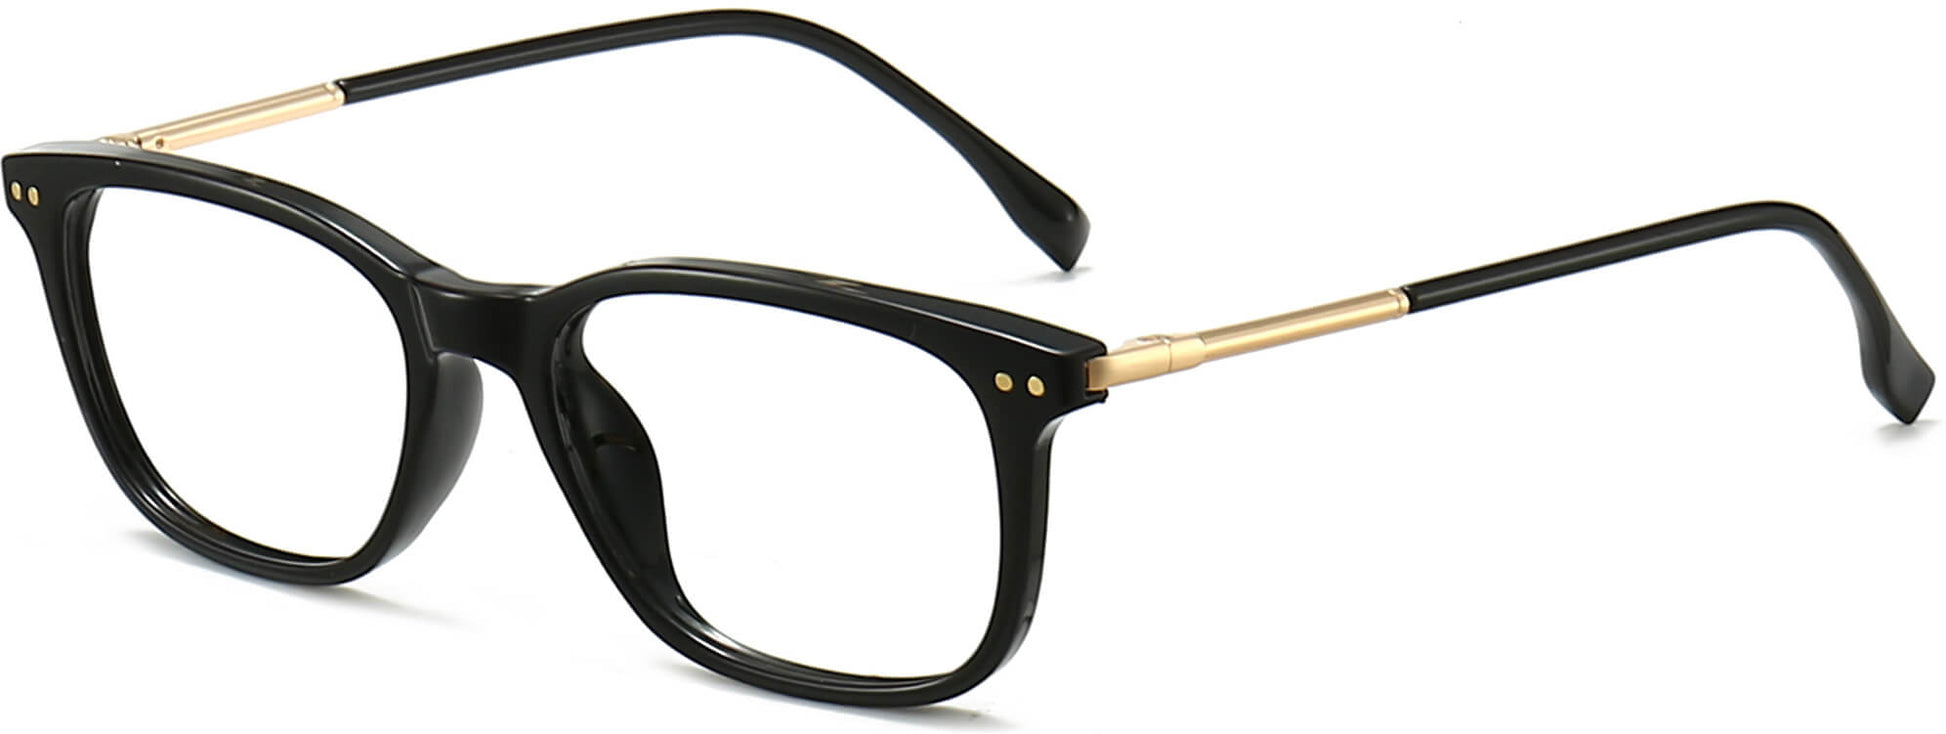 Tinsley Round Black Eyeglasses from ANRRI, angle view